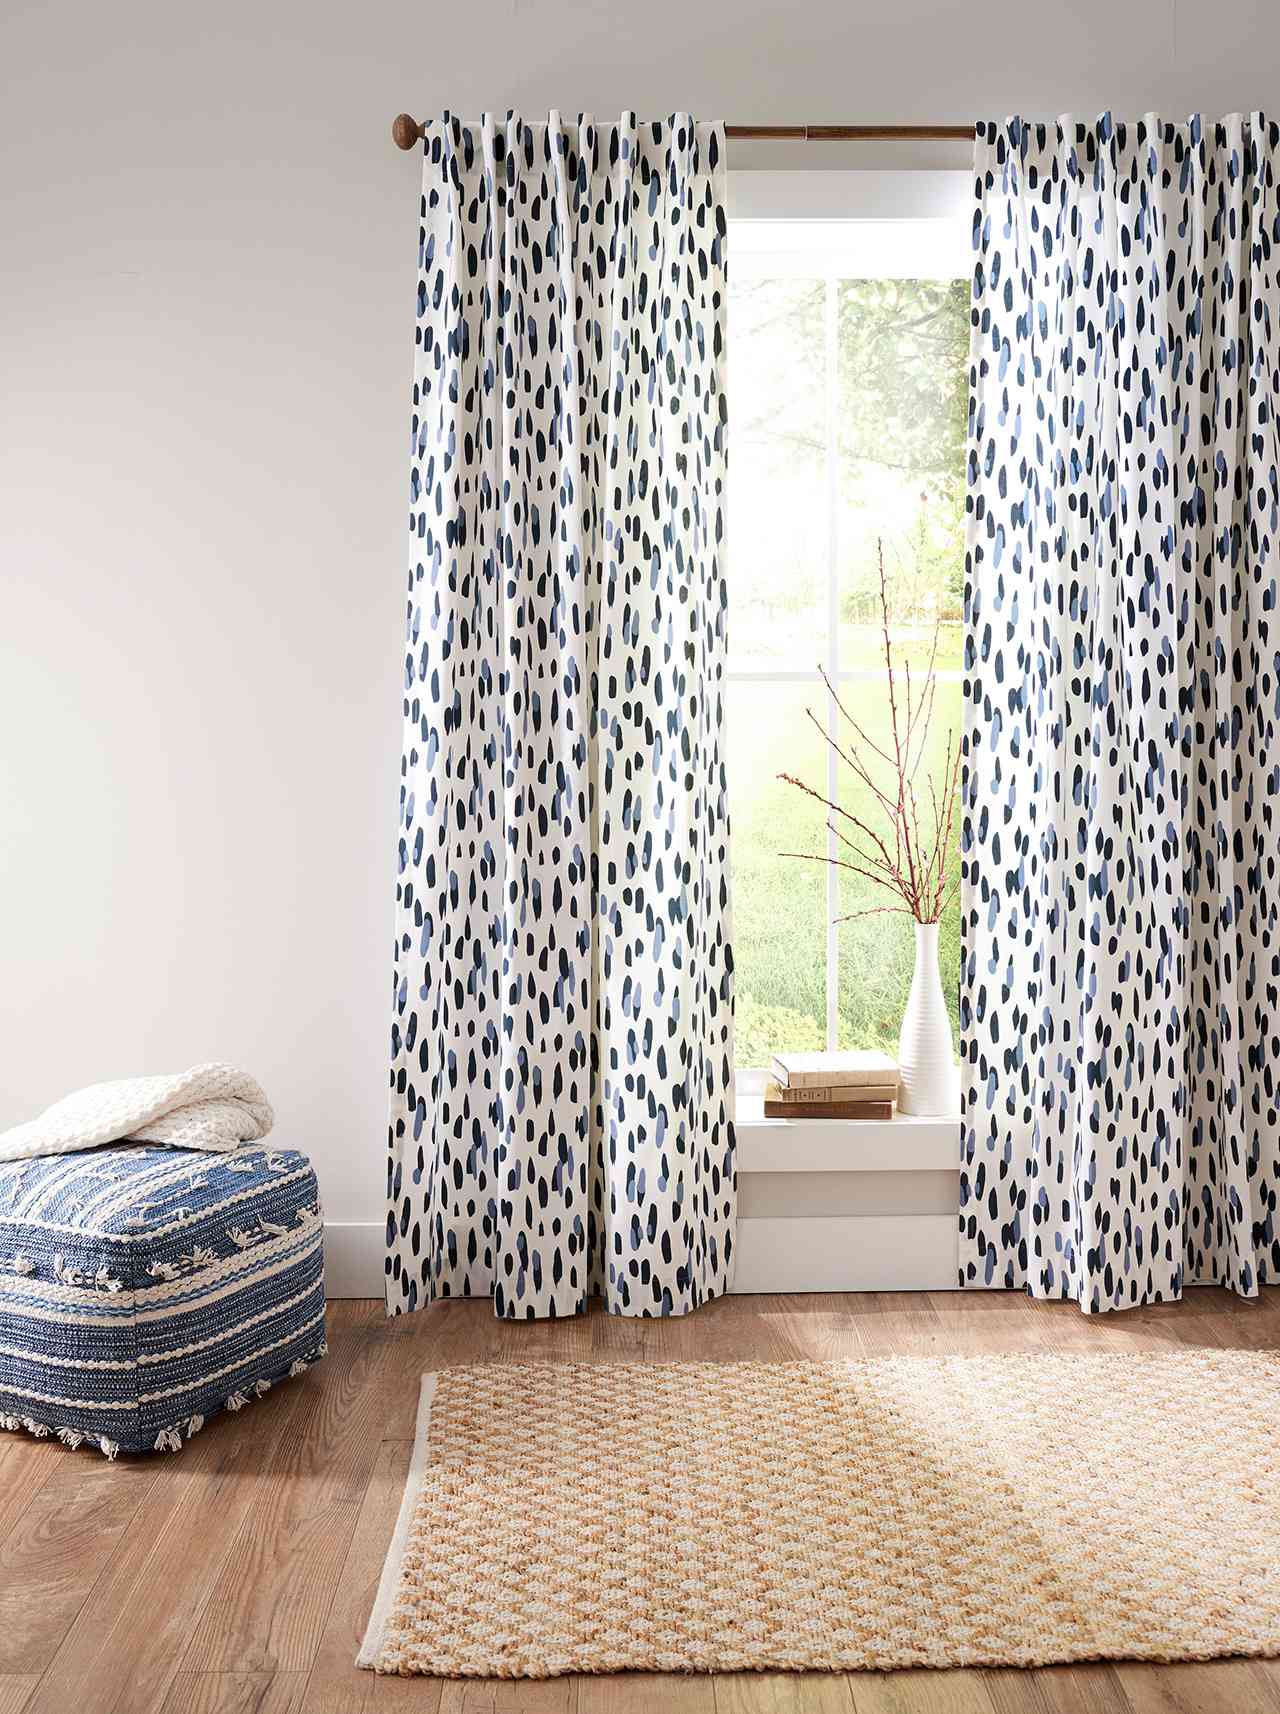 hung blue and white graphic curtains with blue ottoman